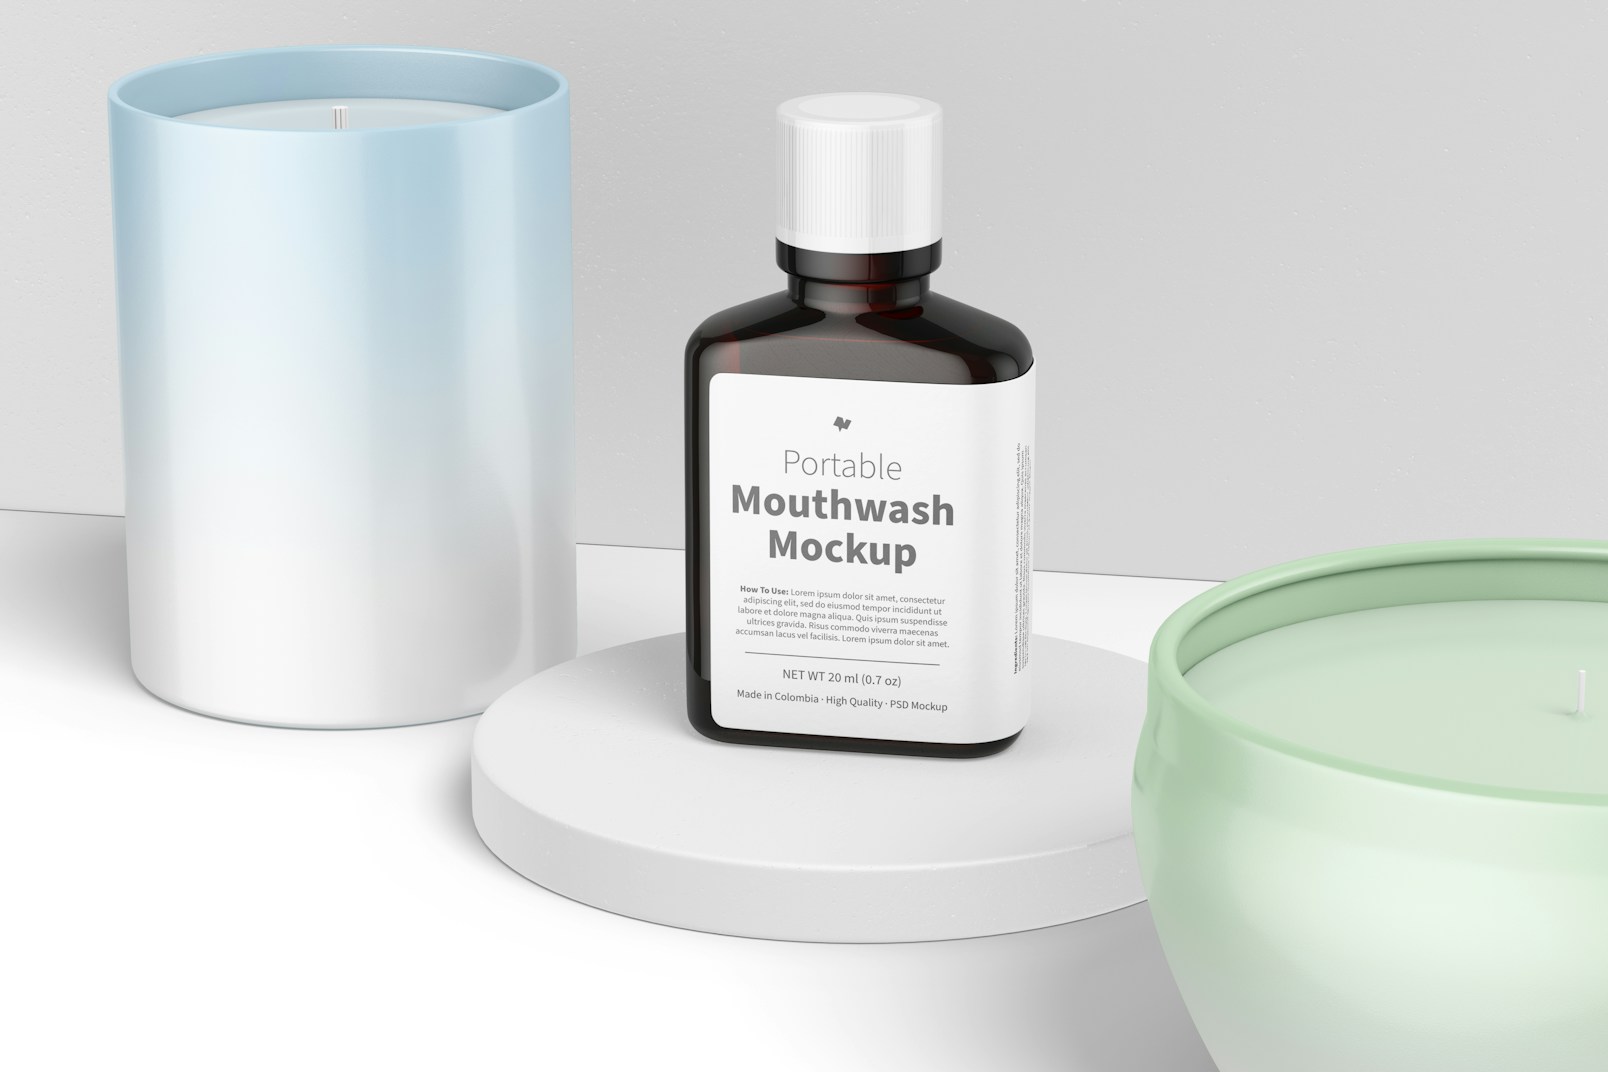 Portable Mouthwash with Label Mockup, Perspective View